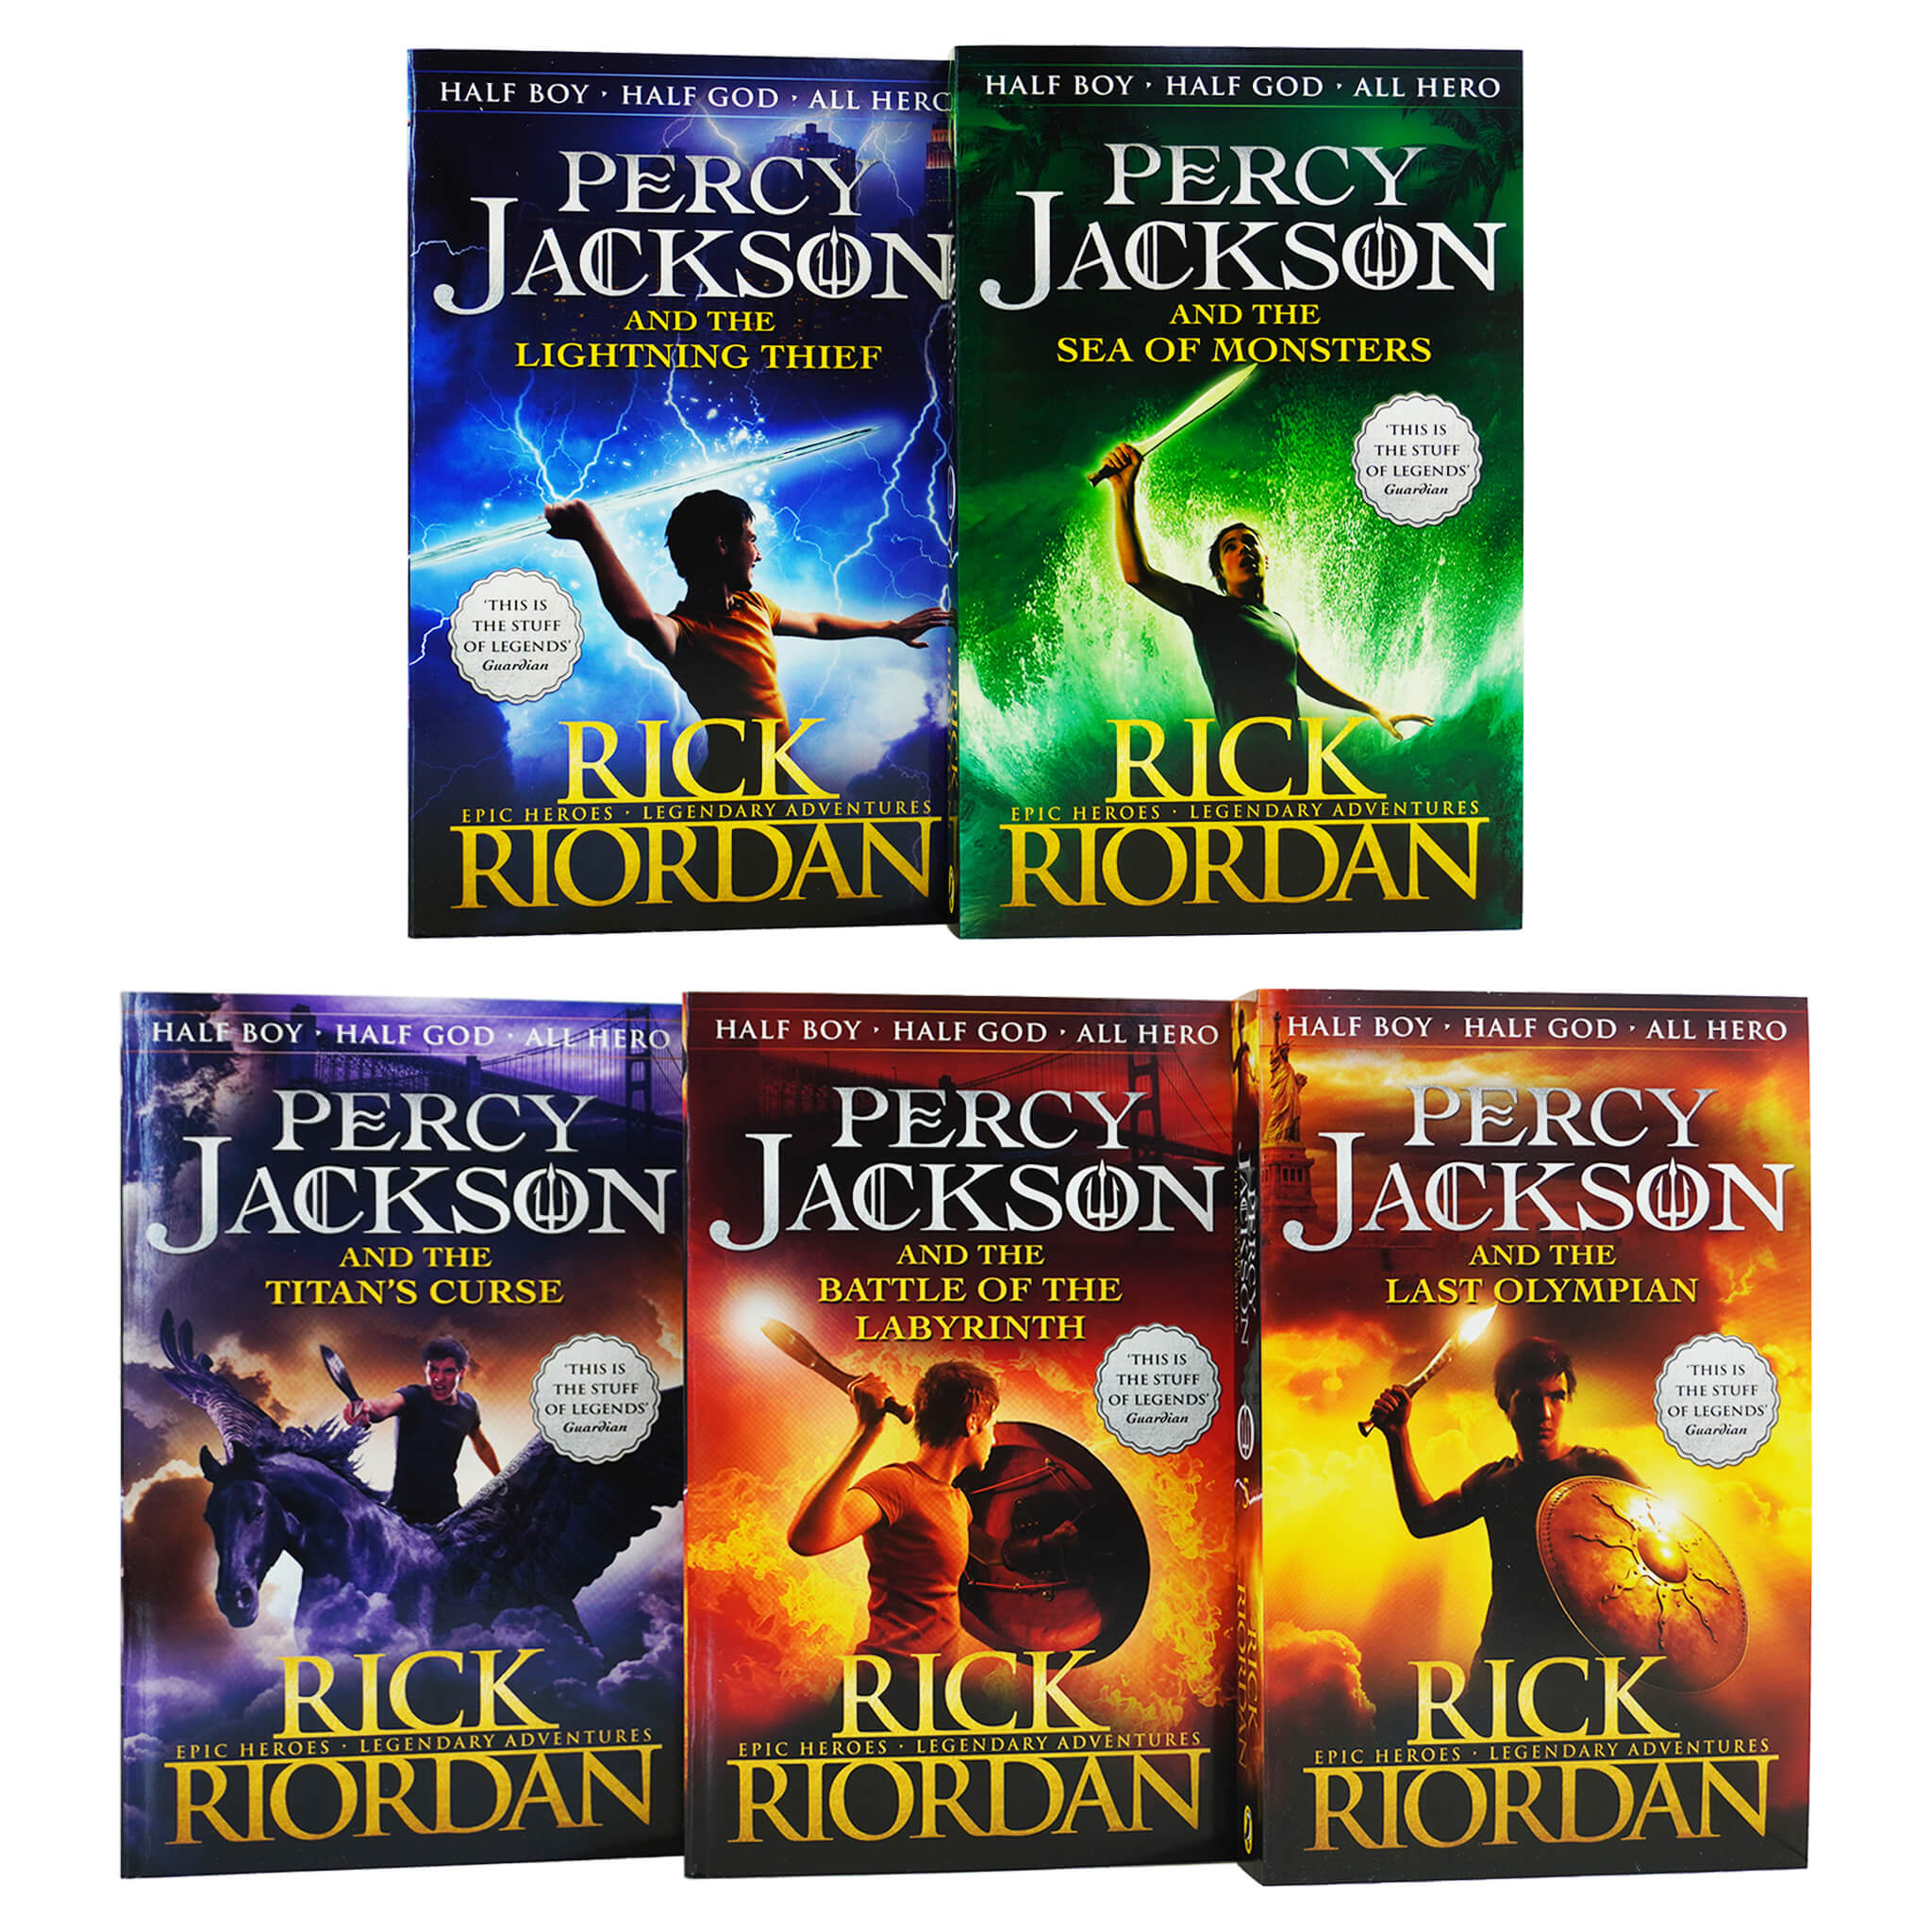 Percy Jackson Collection 7 Books Set (Lightning Thief, Sea of Monsters,  Titan's Curse, Battle of the Labyrinth, Last Olympian, Greek Heroes, Greek